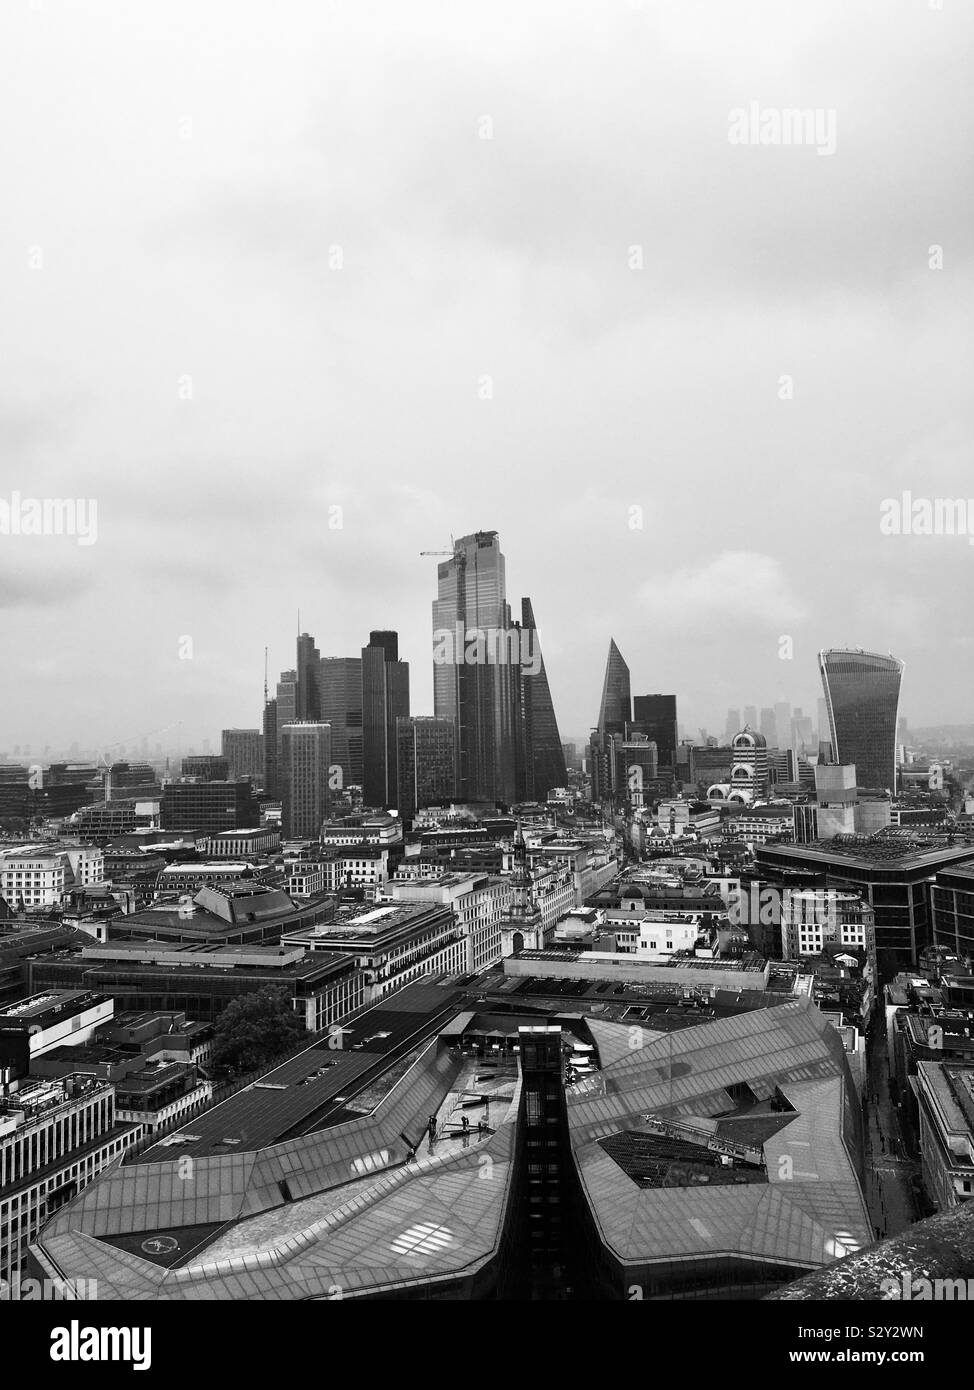 City of London skyline, overlooking New Change, from St Paul’s Cathedral: 2019 Stock Photo